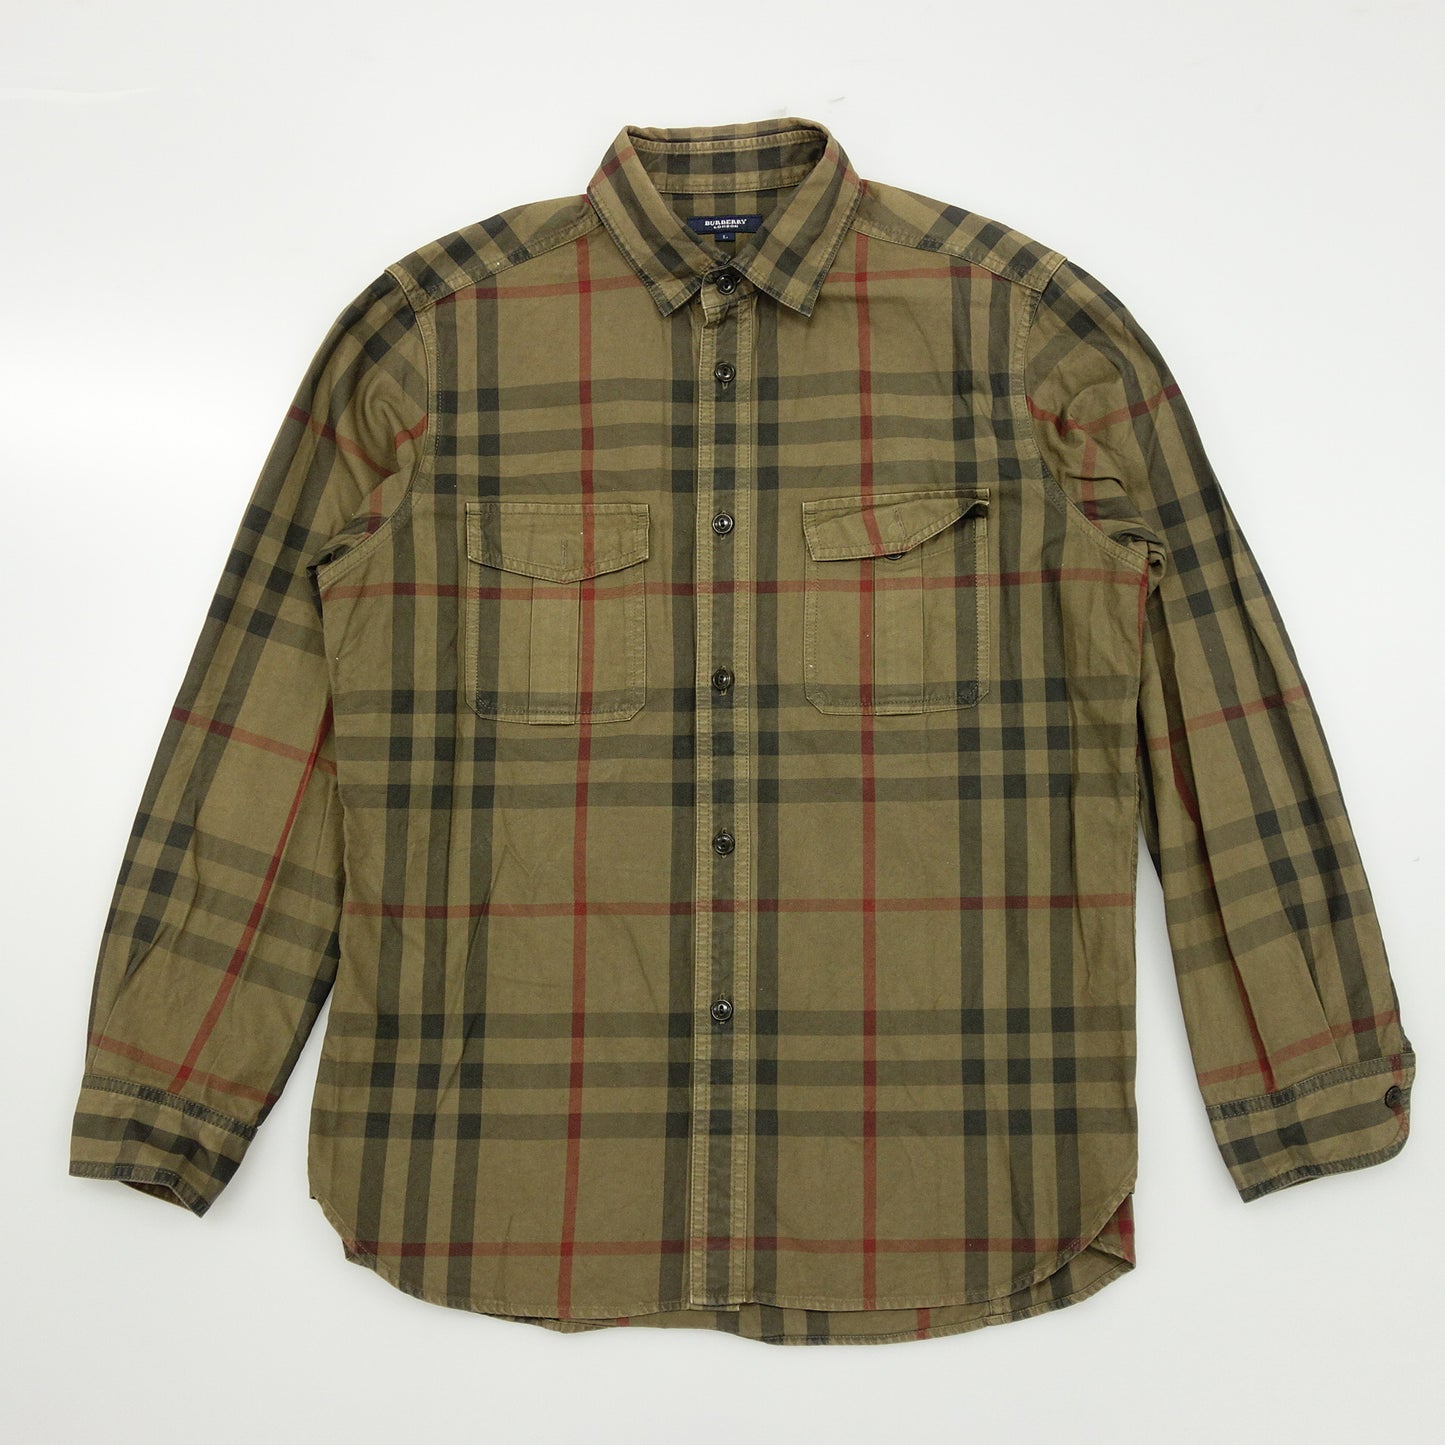 Used◆Burberry London Shirt 2 Pocket Check Olive BURBERRY LONDON [AFB40] 